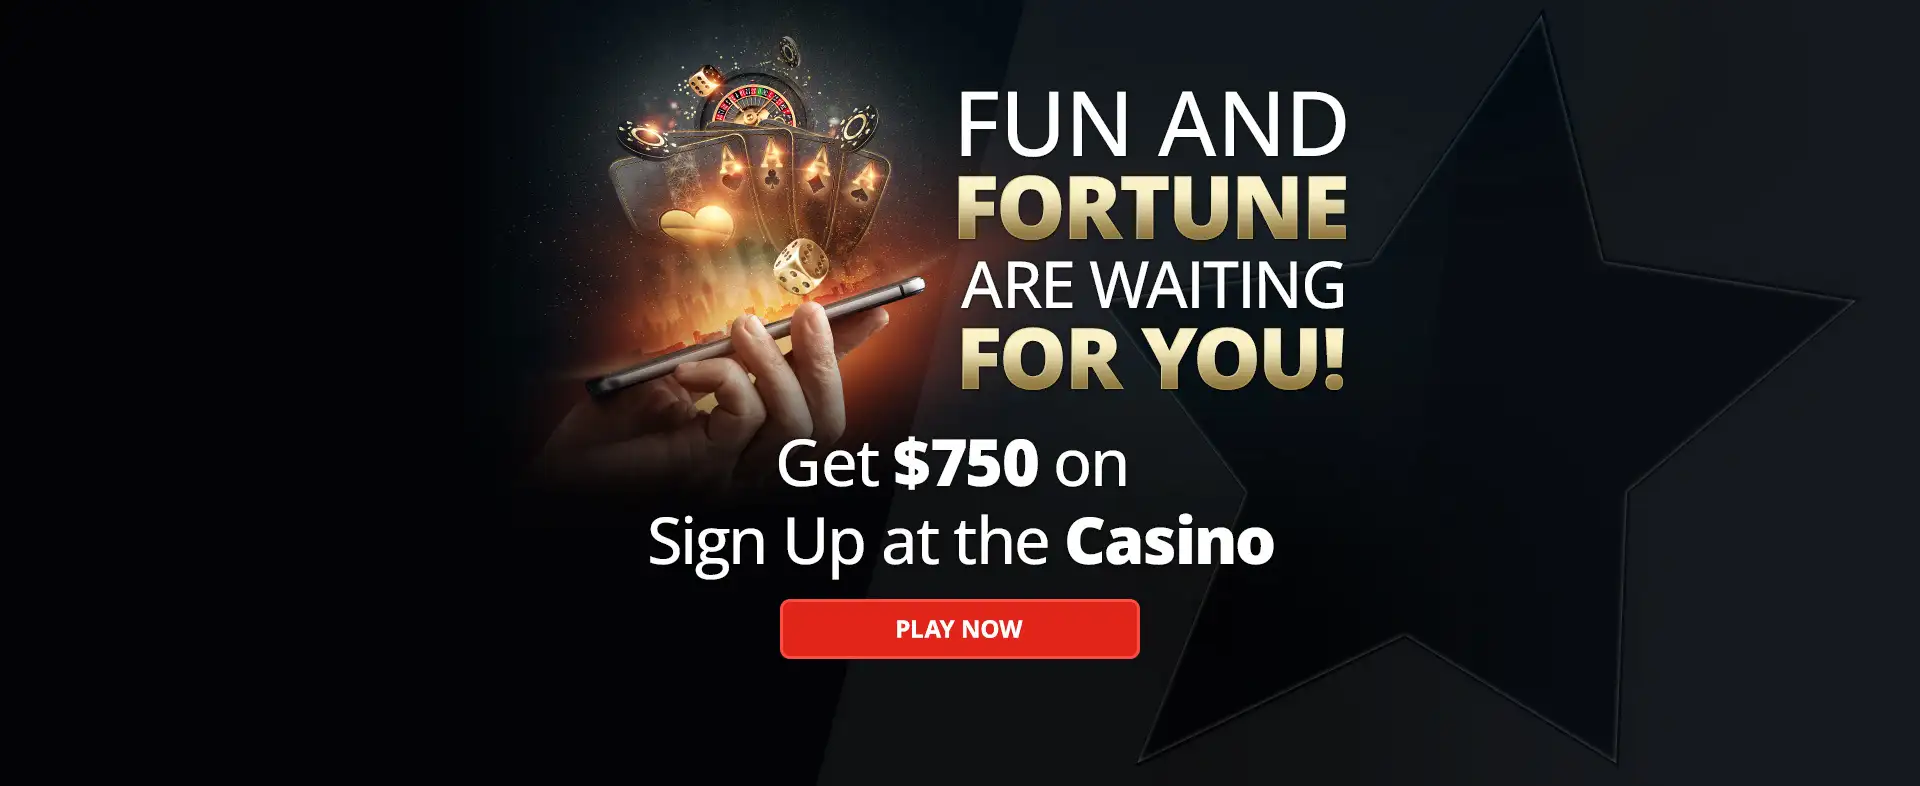 Casino fun and fortune are wating for you